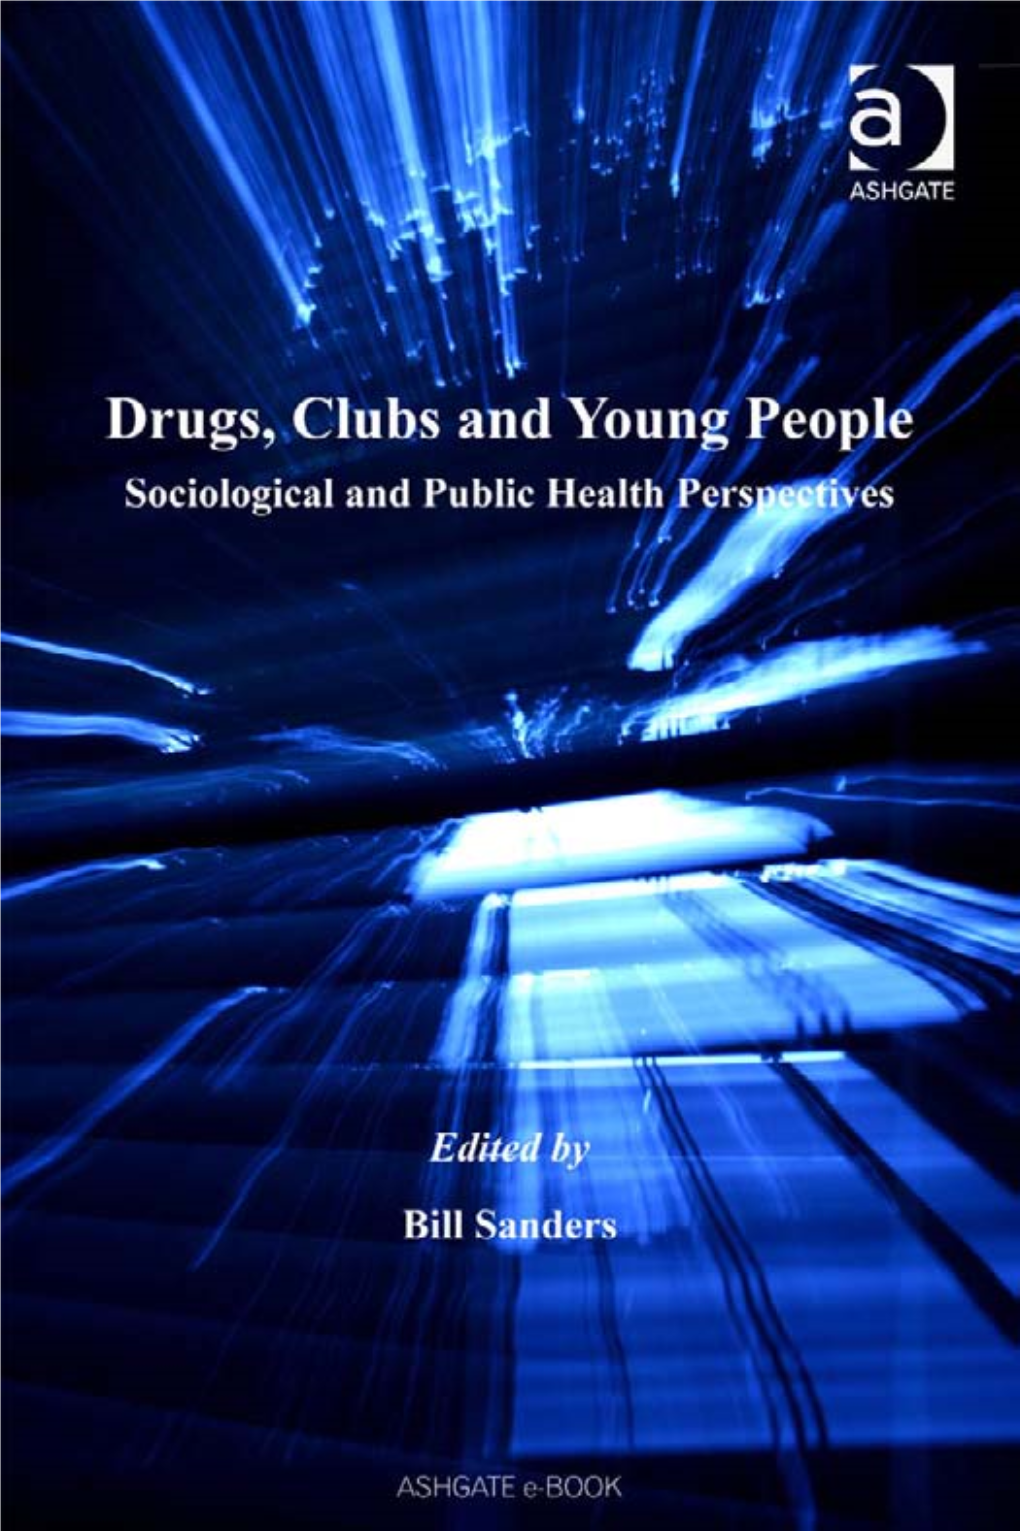 DRUGS, CLUBS and YOUNG PEOPLE for Chez, Whom I Met in the Club Drugs, Clubs and Young People Sociological and Public Health Perspectives